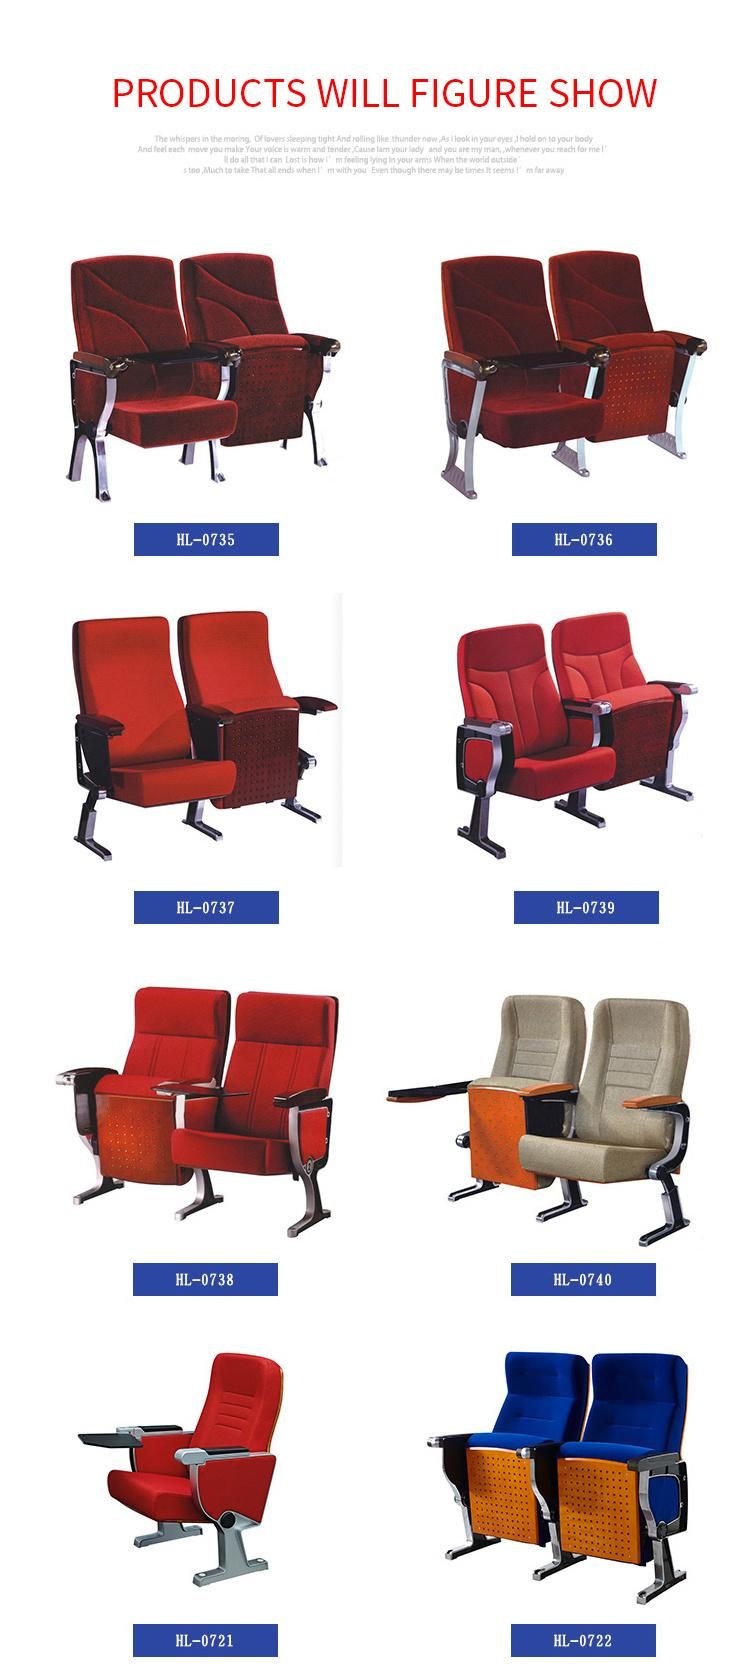 Modern Office Cheap Padded Chair 3-Seat Conference Chair Auditorium Chairs Furniture